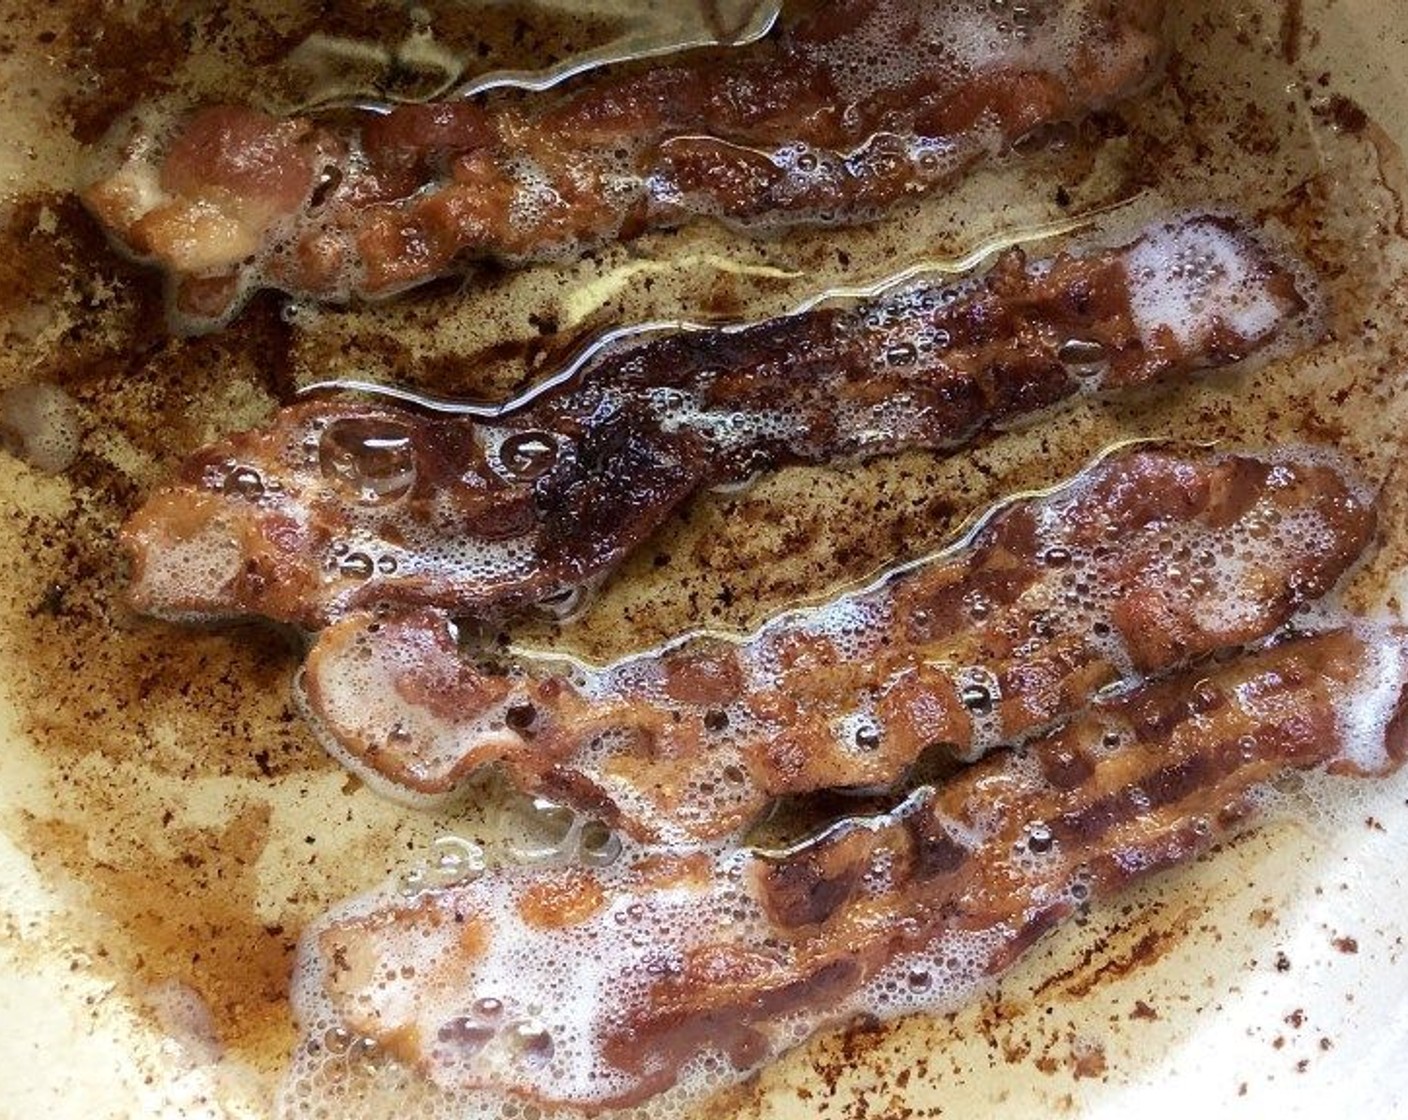 step 1 In a Dutch oven of at least 5-quart capacity, cook Bacon (4 slices) over medium-low heat for 7 to 8 minutes or until crisp, turning often. Transfer to a plate lined with paper towels, keeping the drippings in the pot. Once the bacon is cooled, break into small pieces to be used as a garnish when serving.